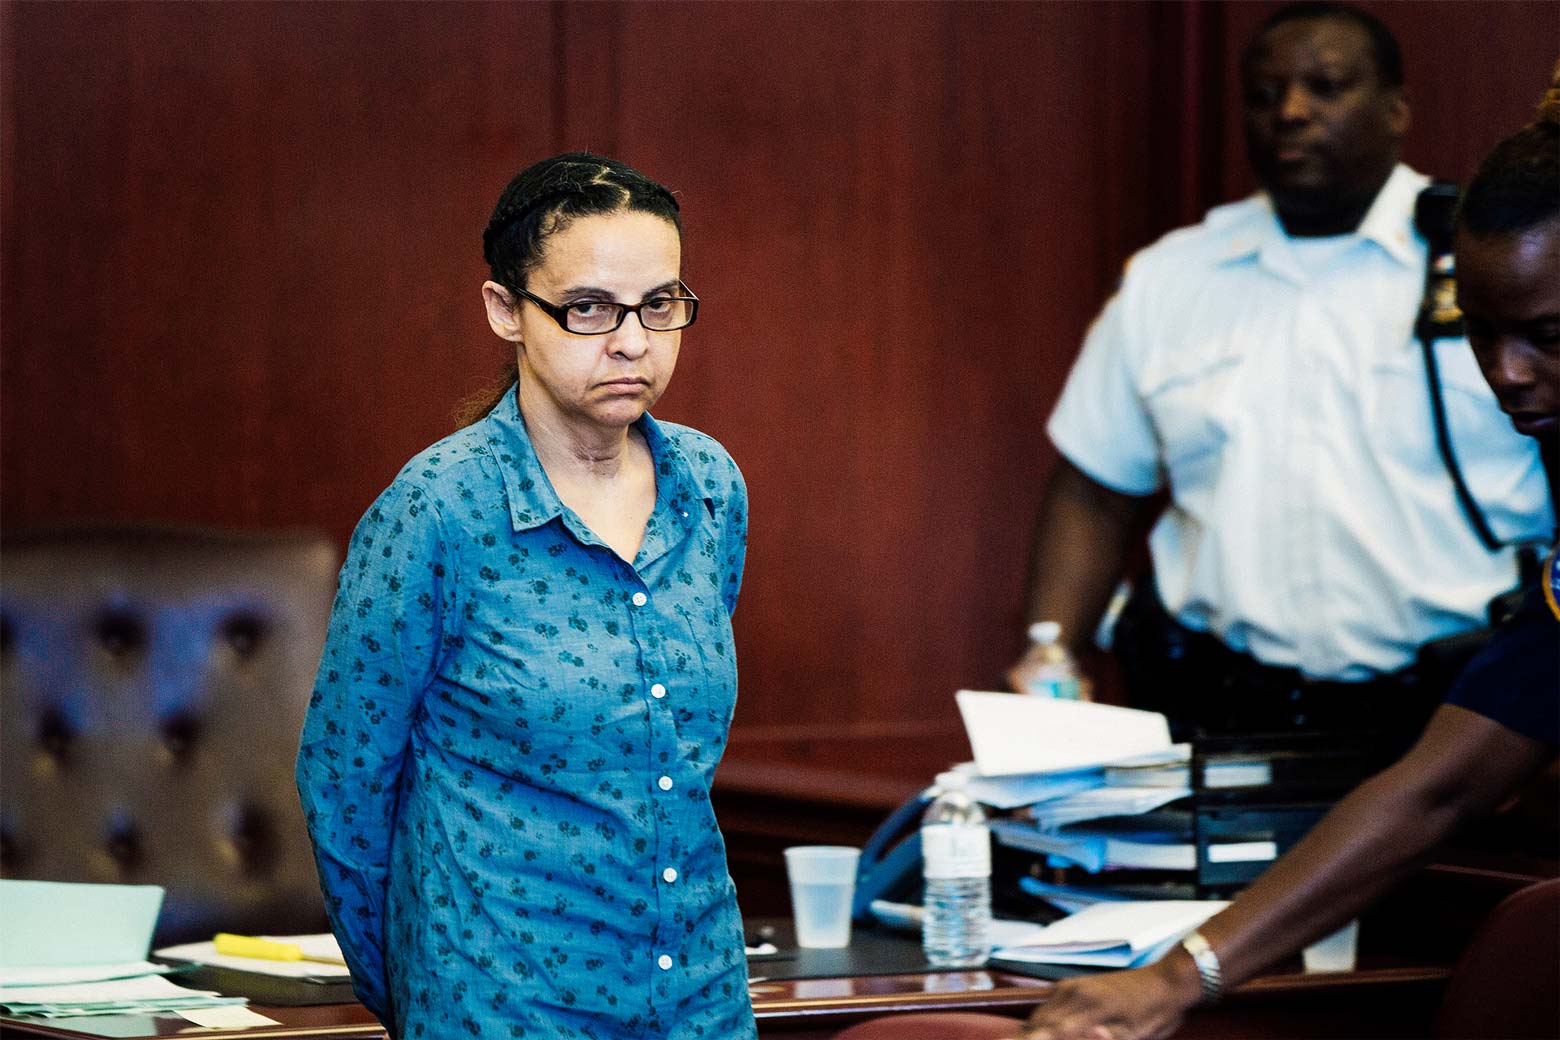 Yoselyn Ortega arrives for a hearing for her trial at Manhattan Supreme Court in New York City on July 8, 2013.